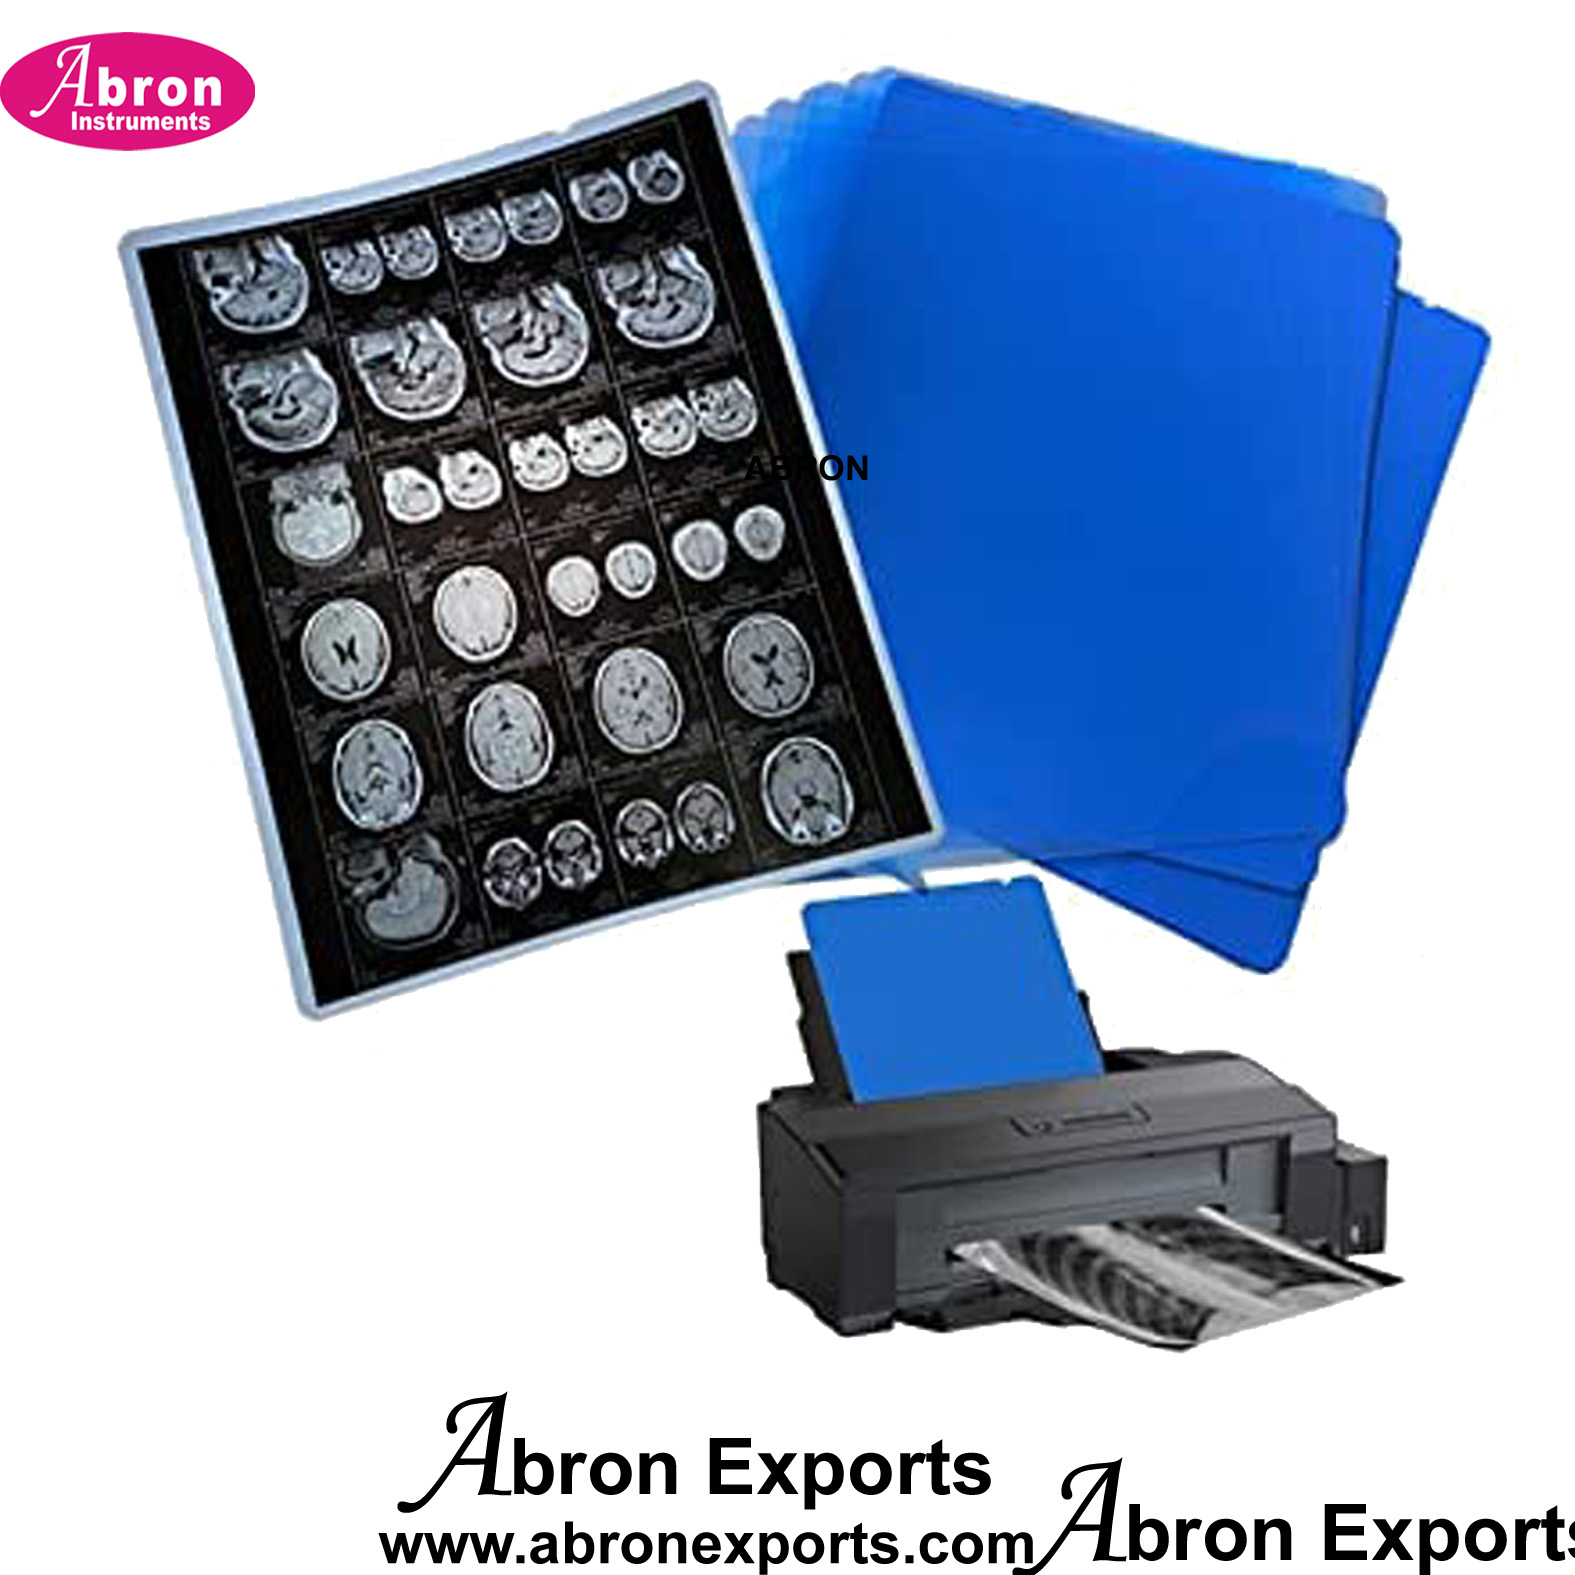 x-ray Blue film for printer Image water proof 8x10inch x100pc 280GSM Orthopadic Dental Medical clinic Hospital Abron ABM-2784BF1H 